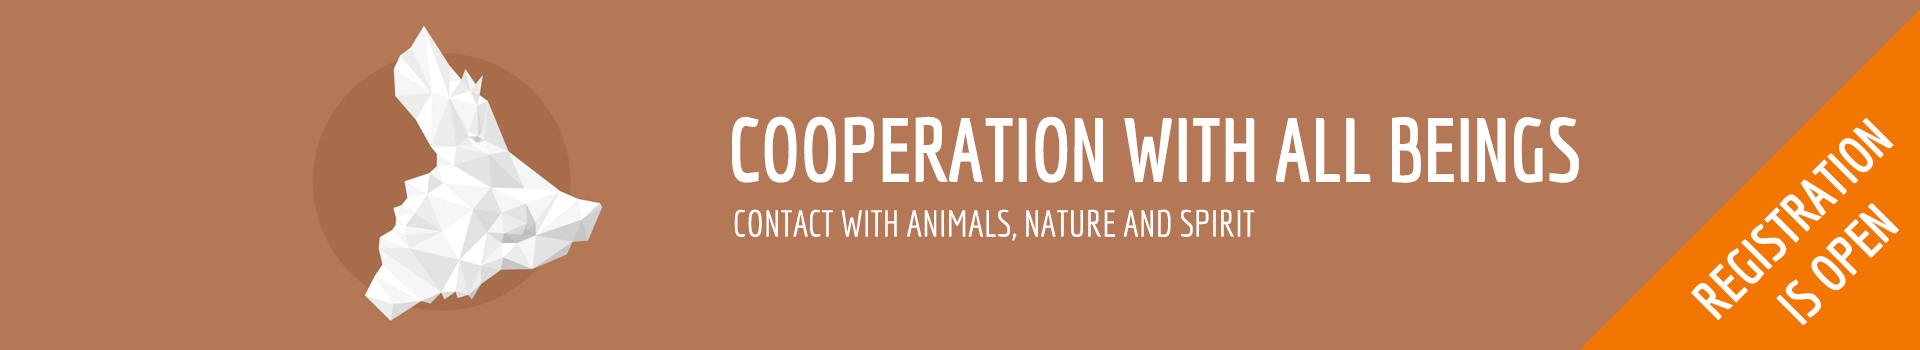 Cooperation with All Beings banner website registration open